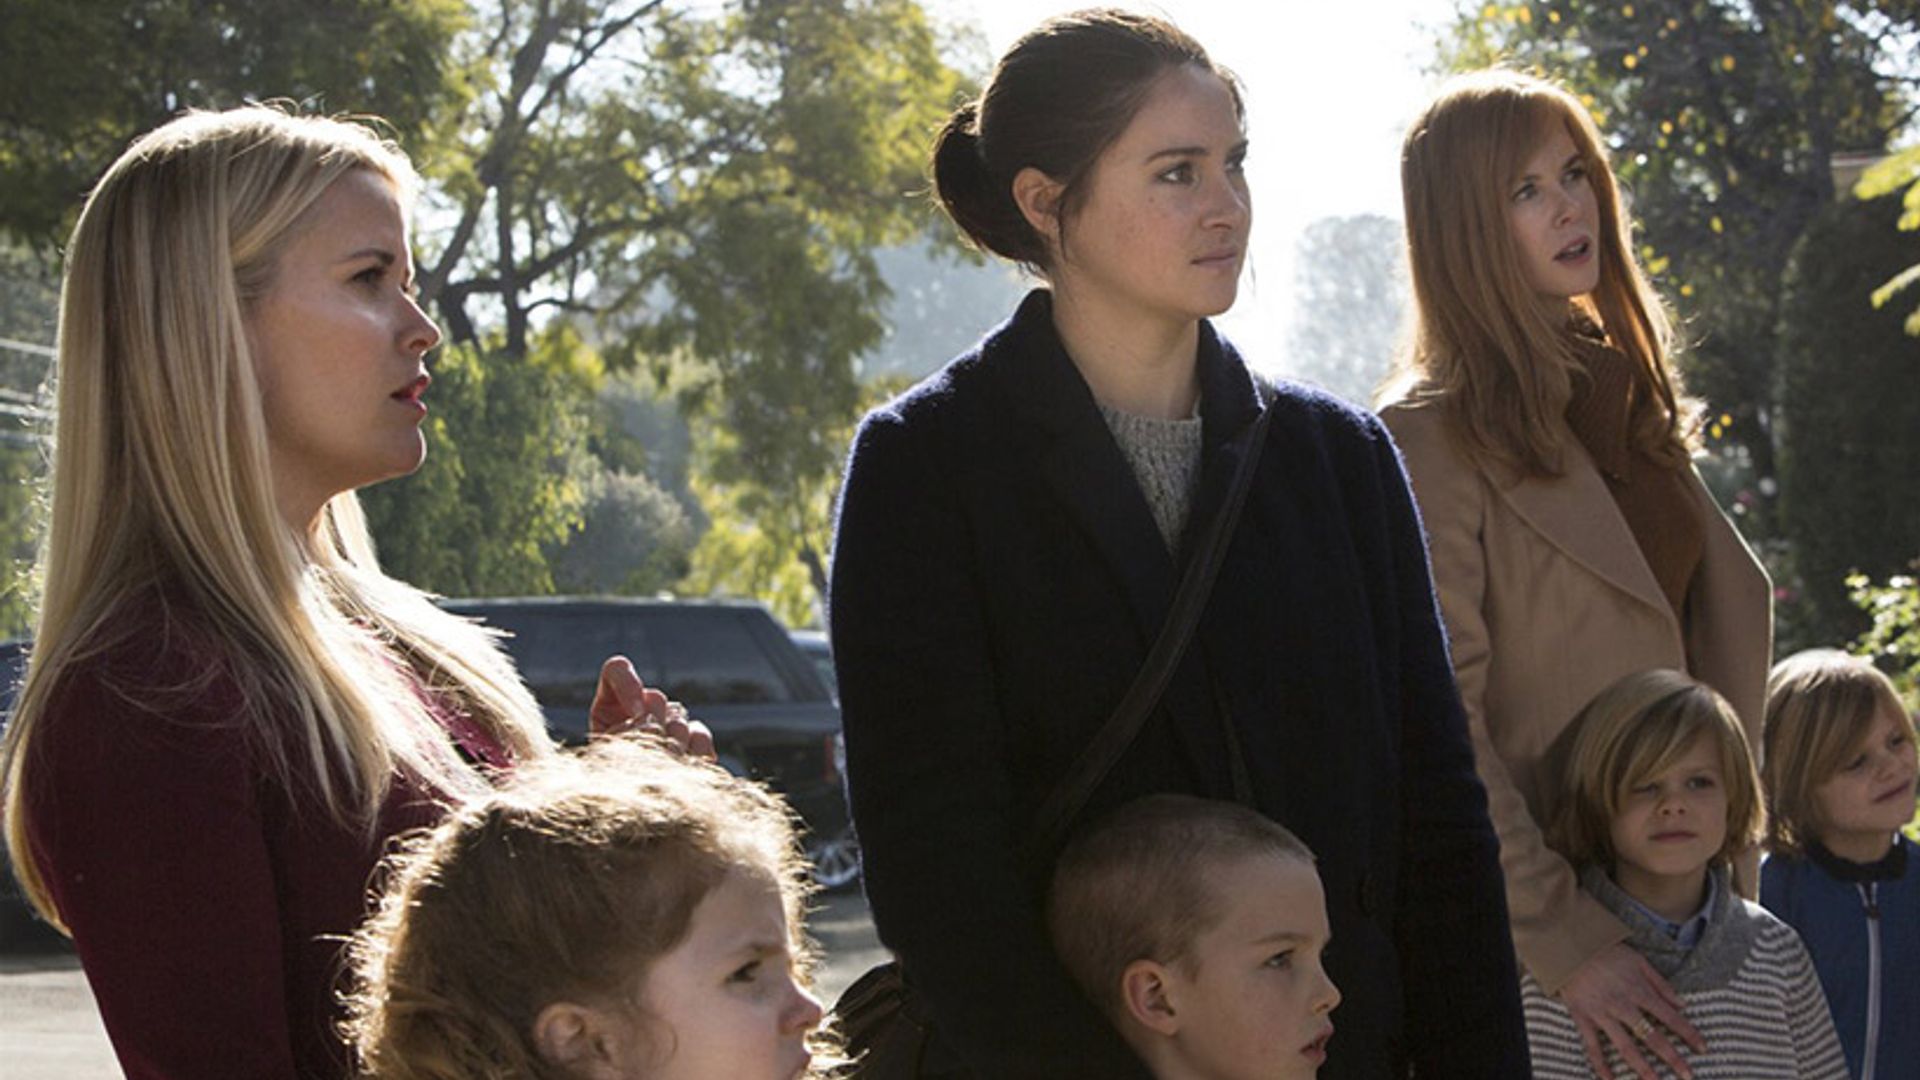 Nicole Kidman, Reese Witherspoon and Shailene Woodley star in creepy trailer for HBO show Big Little Lies - watch it here!